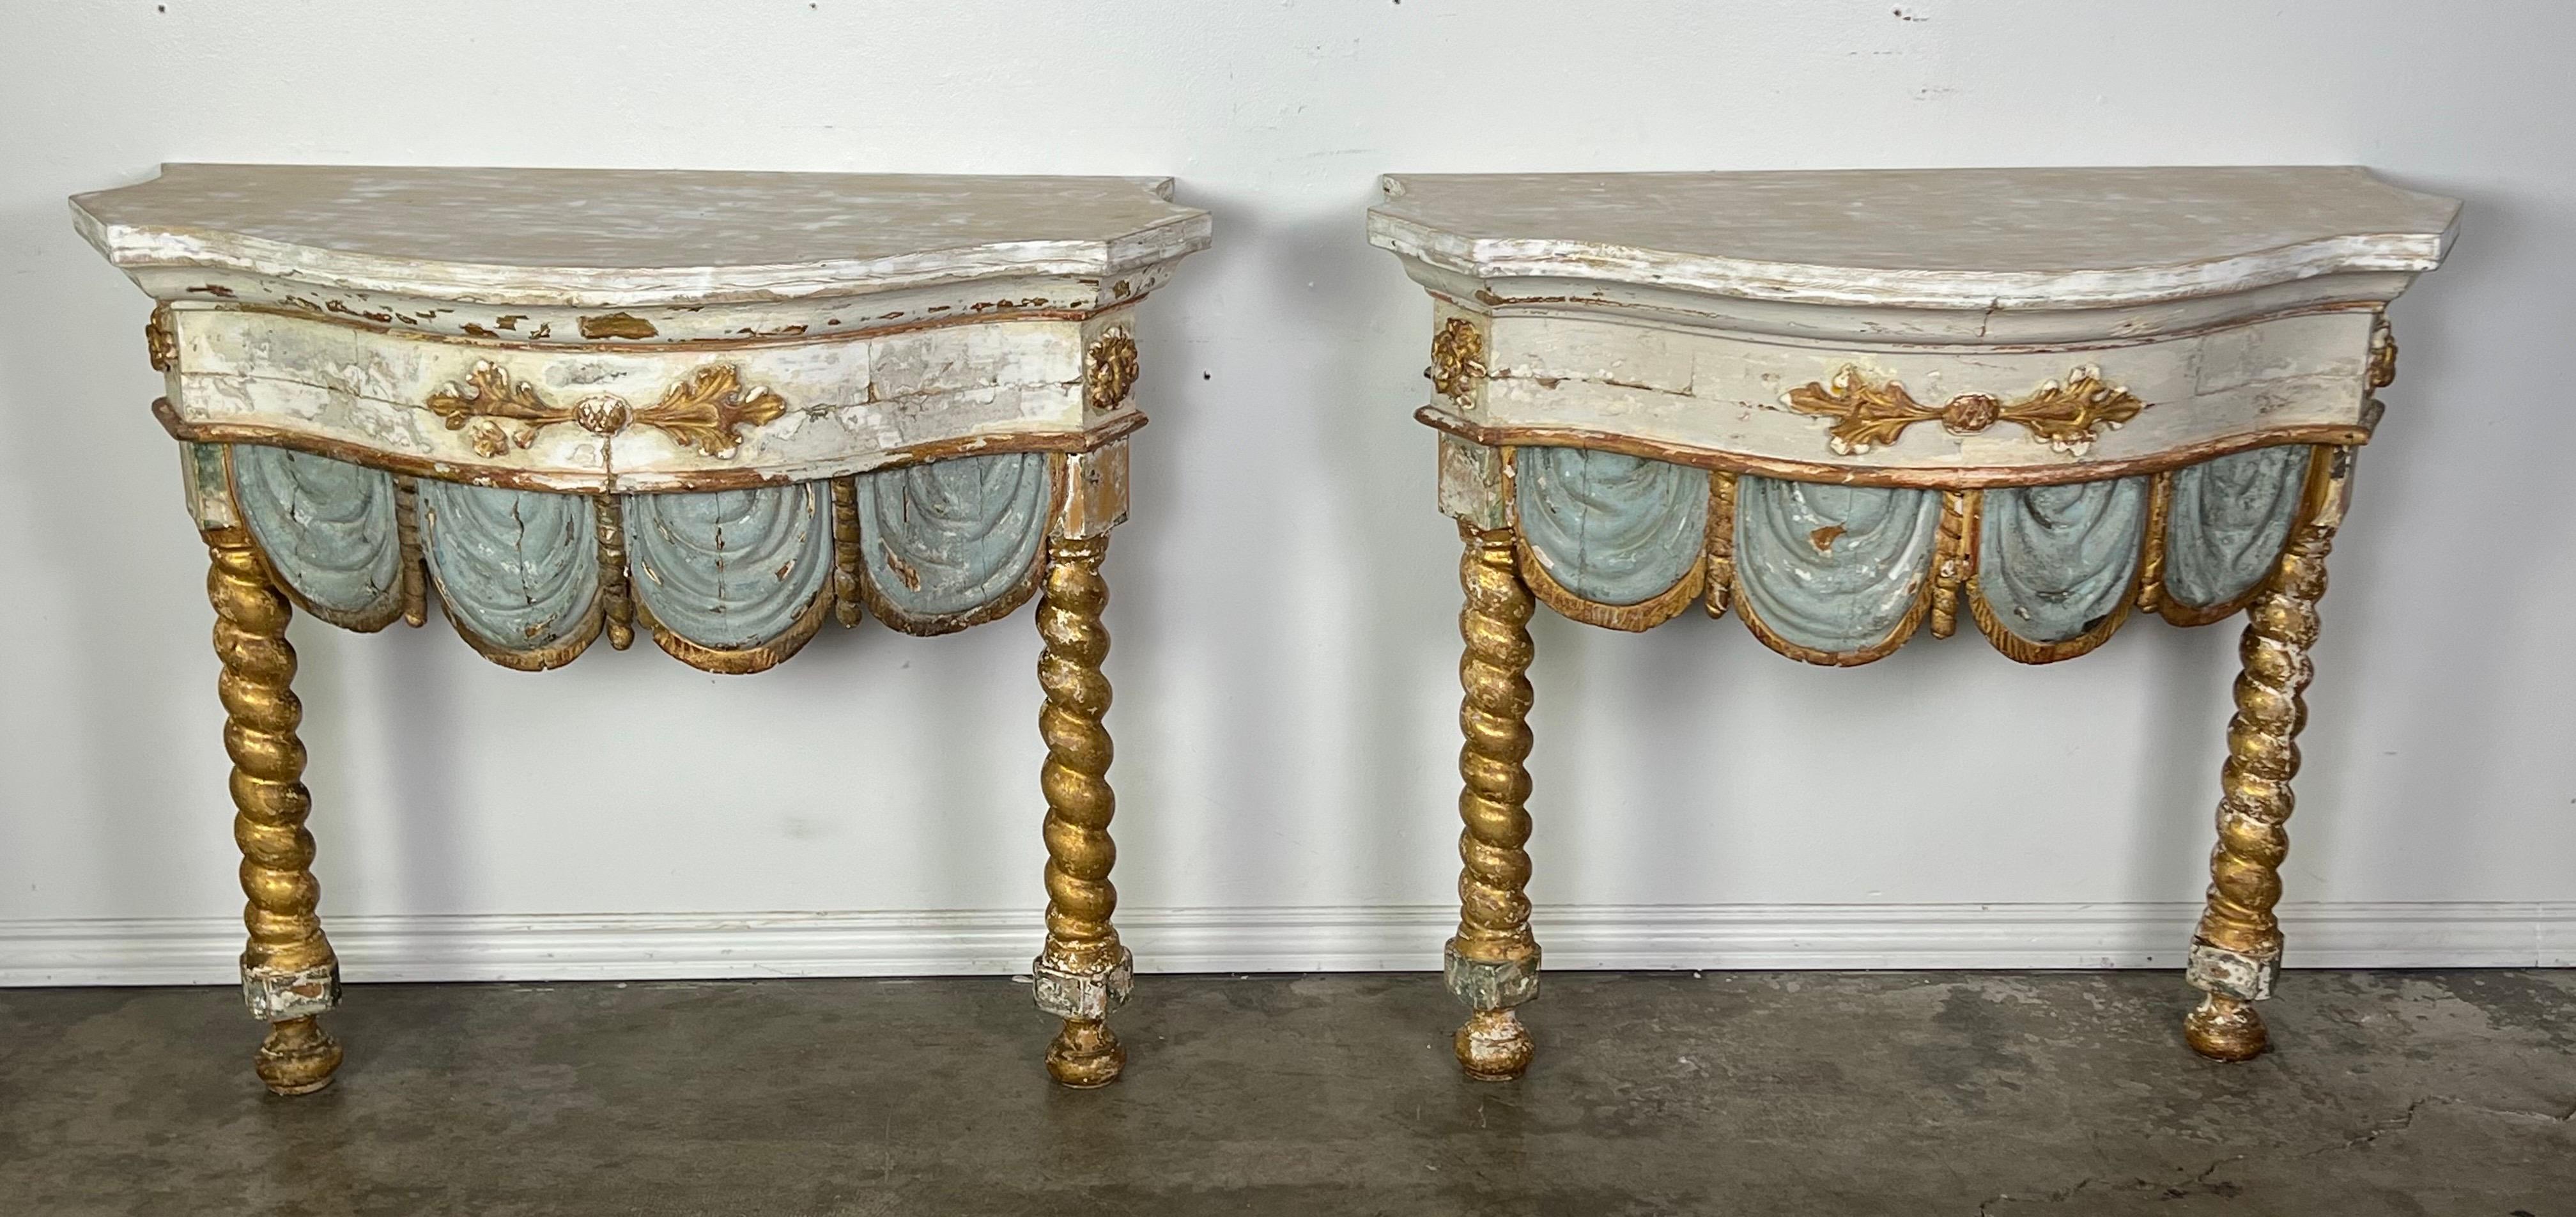 Pair of early 19th century Italian painted and parcel gilt consoles, showcasing the described features such as twisted gilt wood straight legs, blue & gold leaf scalloped apron, and a wood painted top.